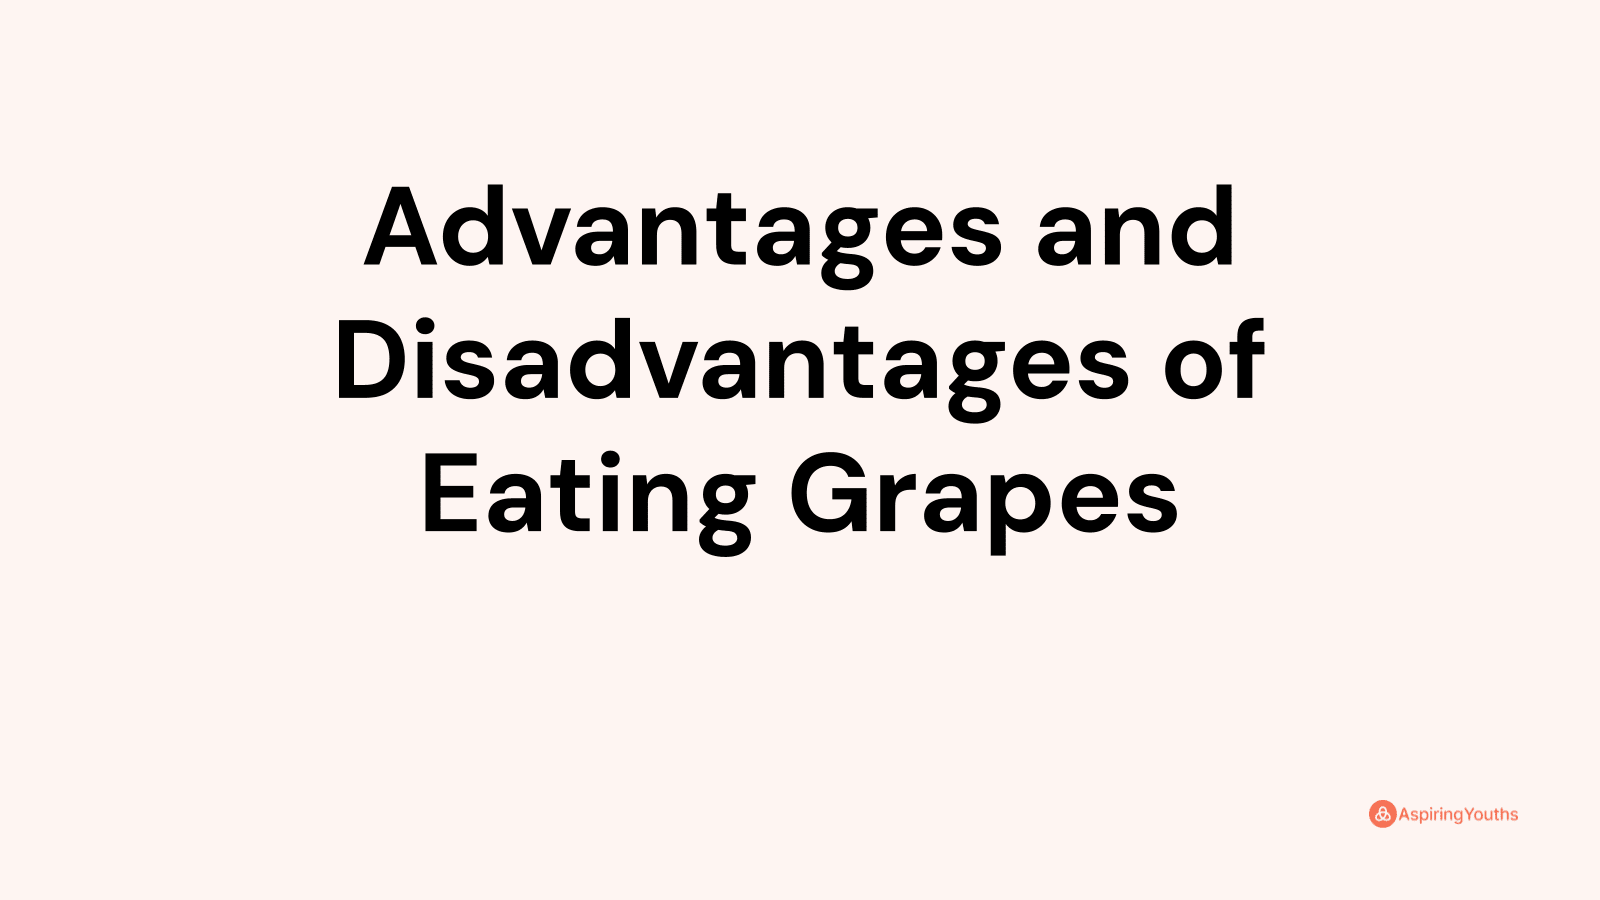 Advantages and disadvantages of Eating Grapes